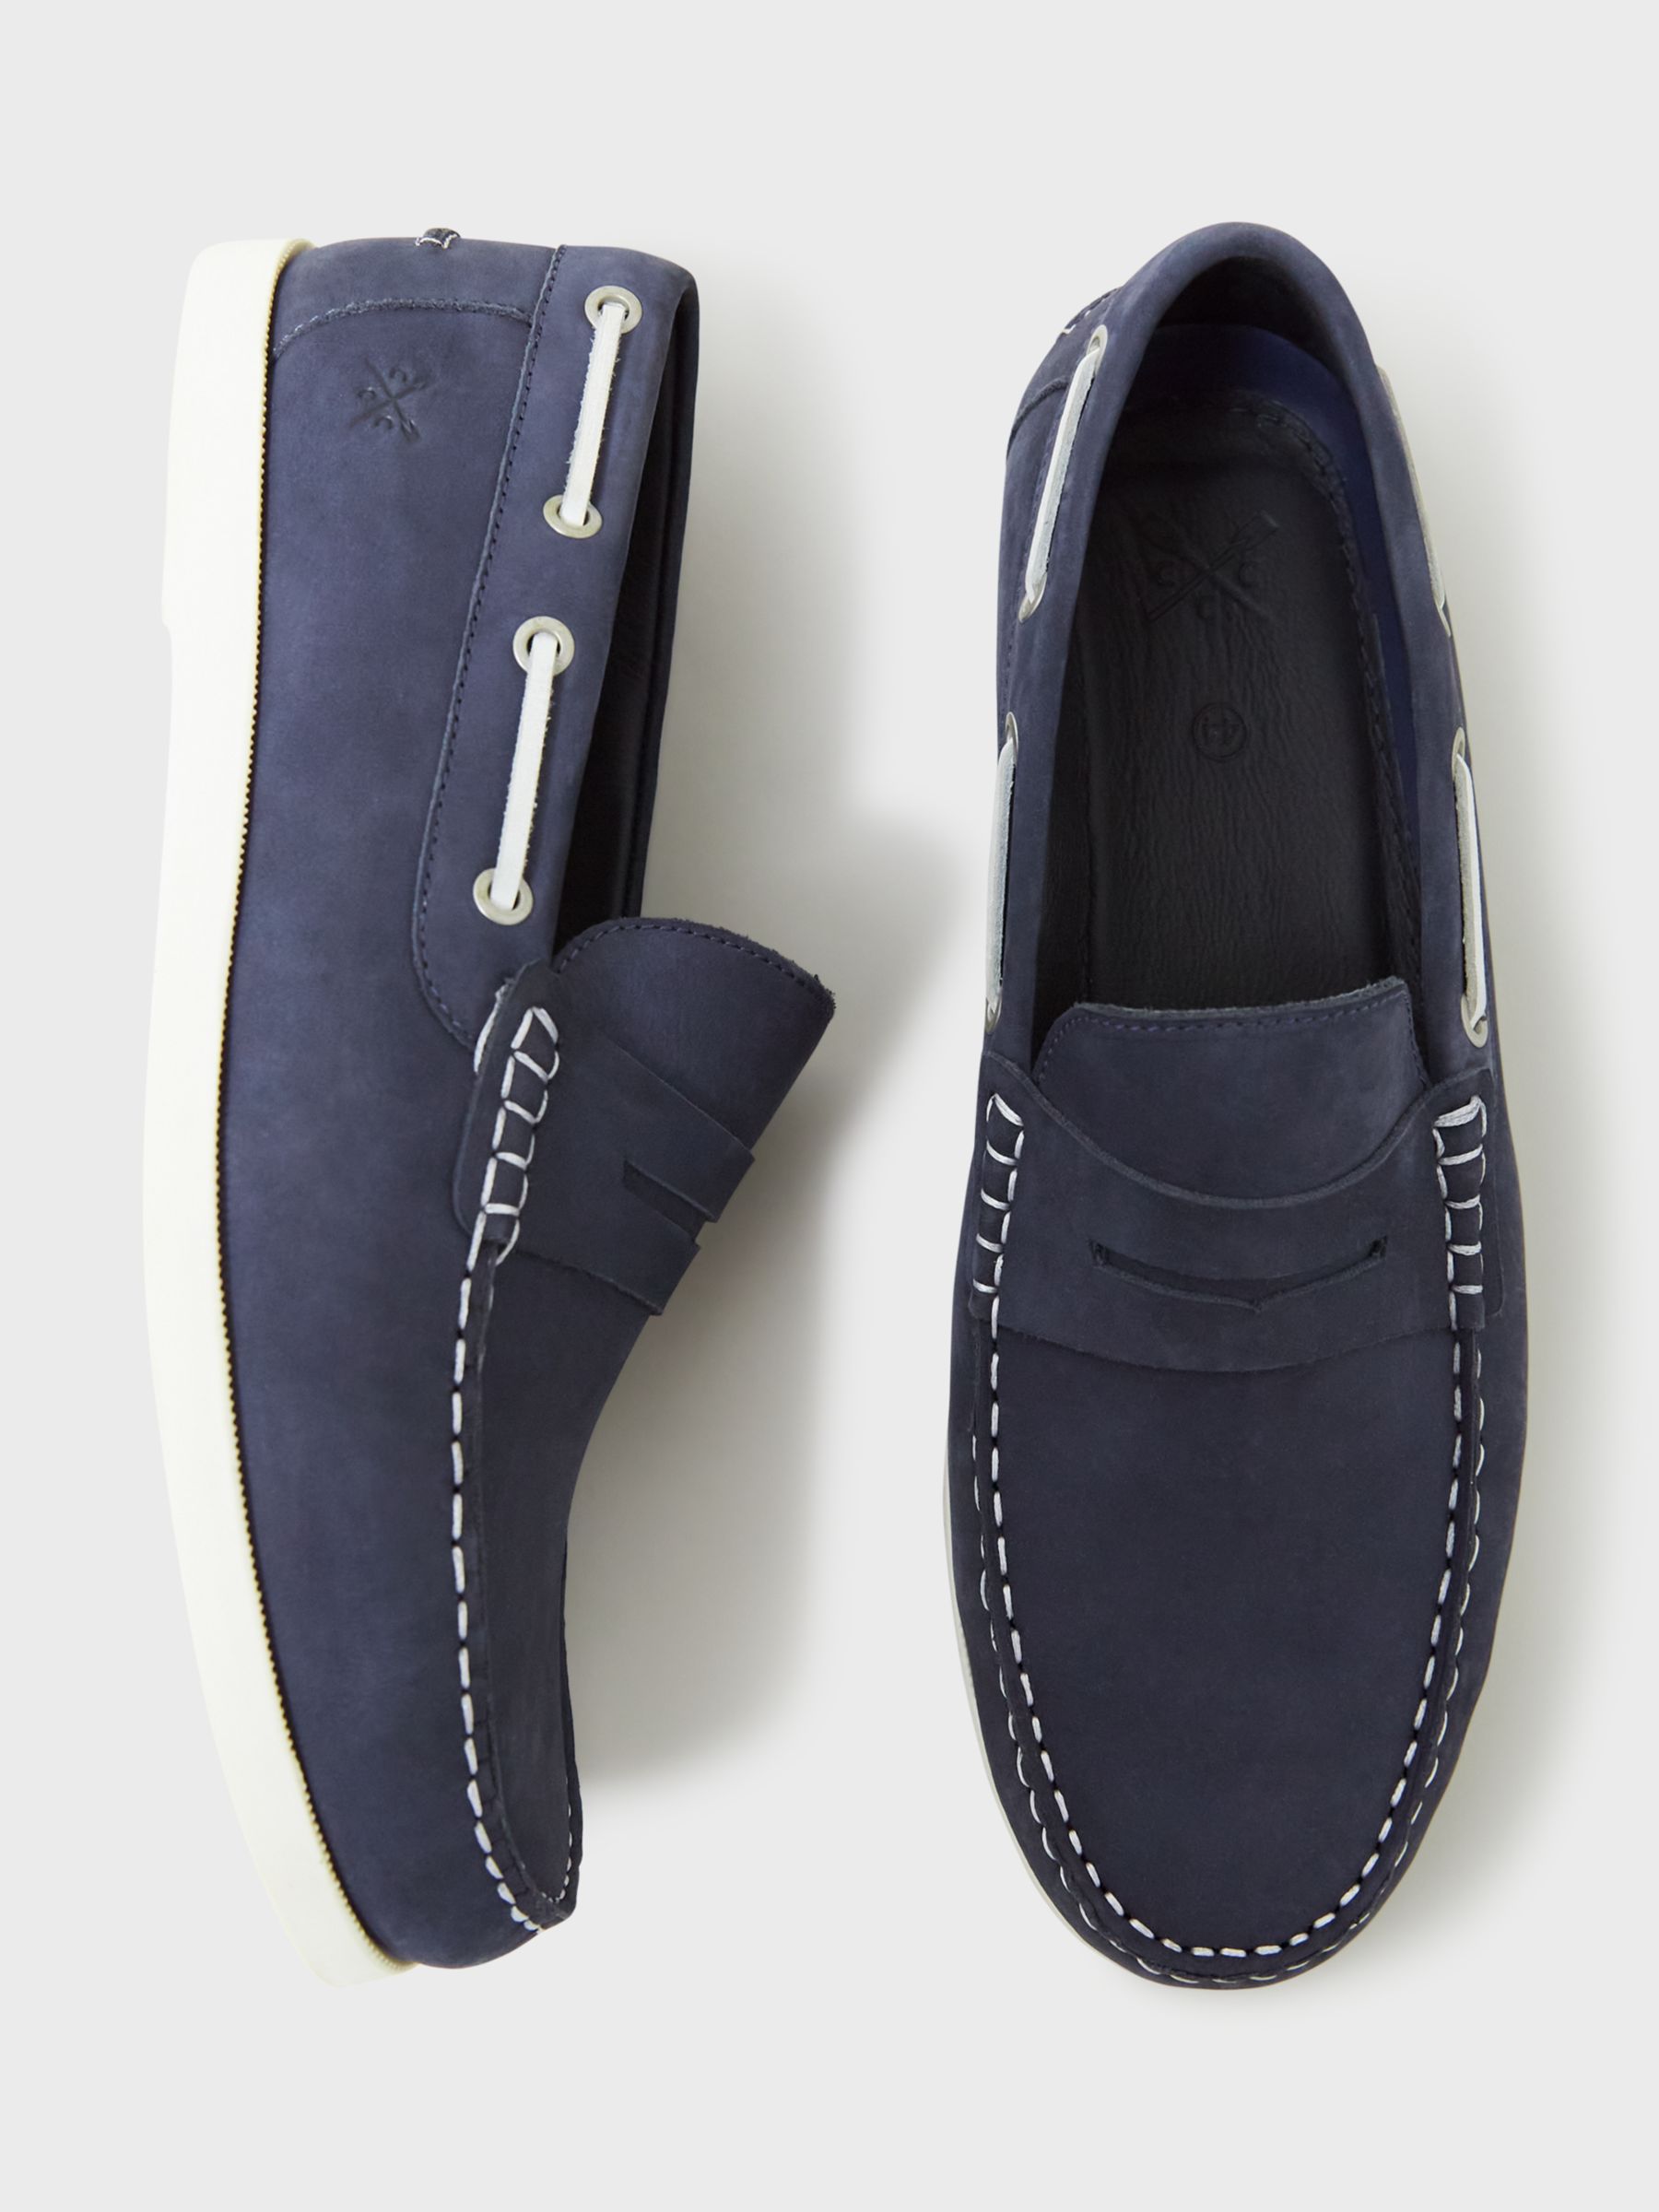 Crew Clothing Slip On Classic Deck Shoes, Navy Blue, 11.5